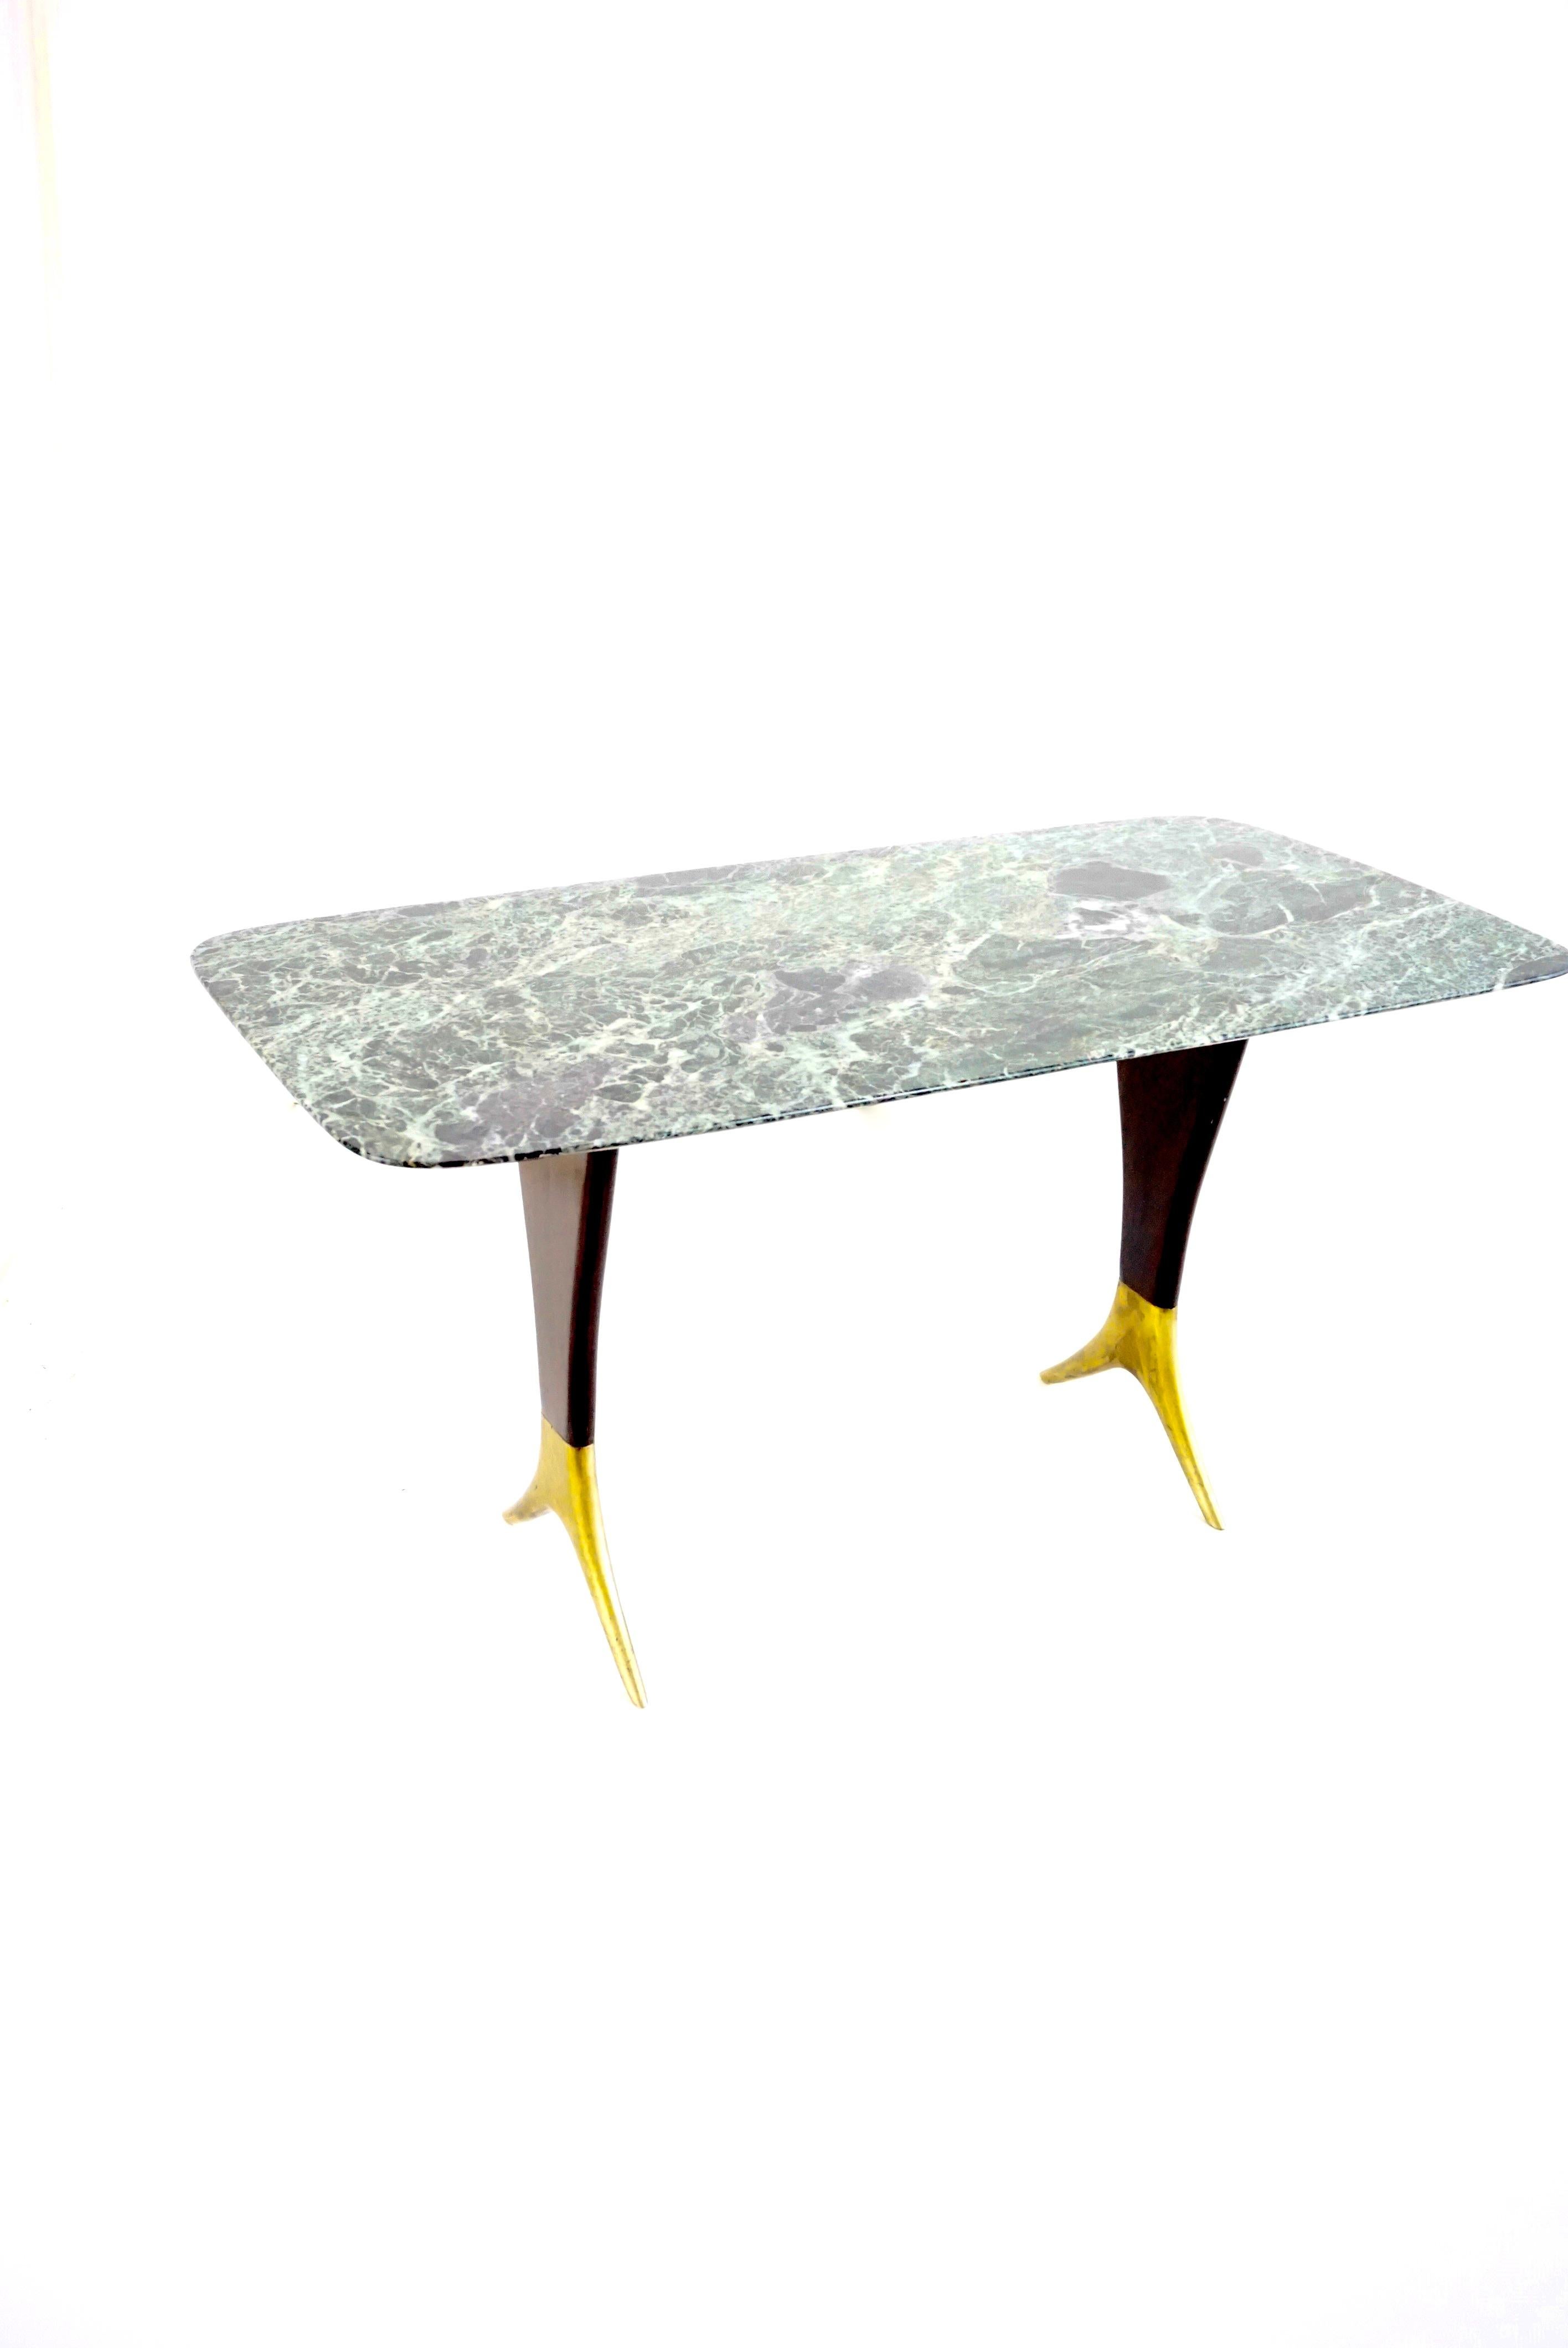 fine and original low table, coffe table with brass feet and verde alpi marble top, walnut, designed by Guglielmo Ulrich, 1940 
verde alpi marble, walnut finished rosewood and brass feet
original feet shape with bronze casting handmade and flat